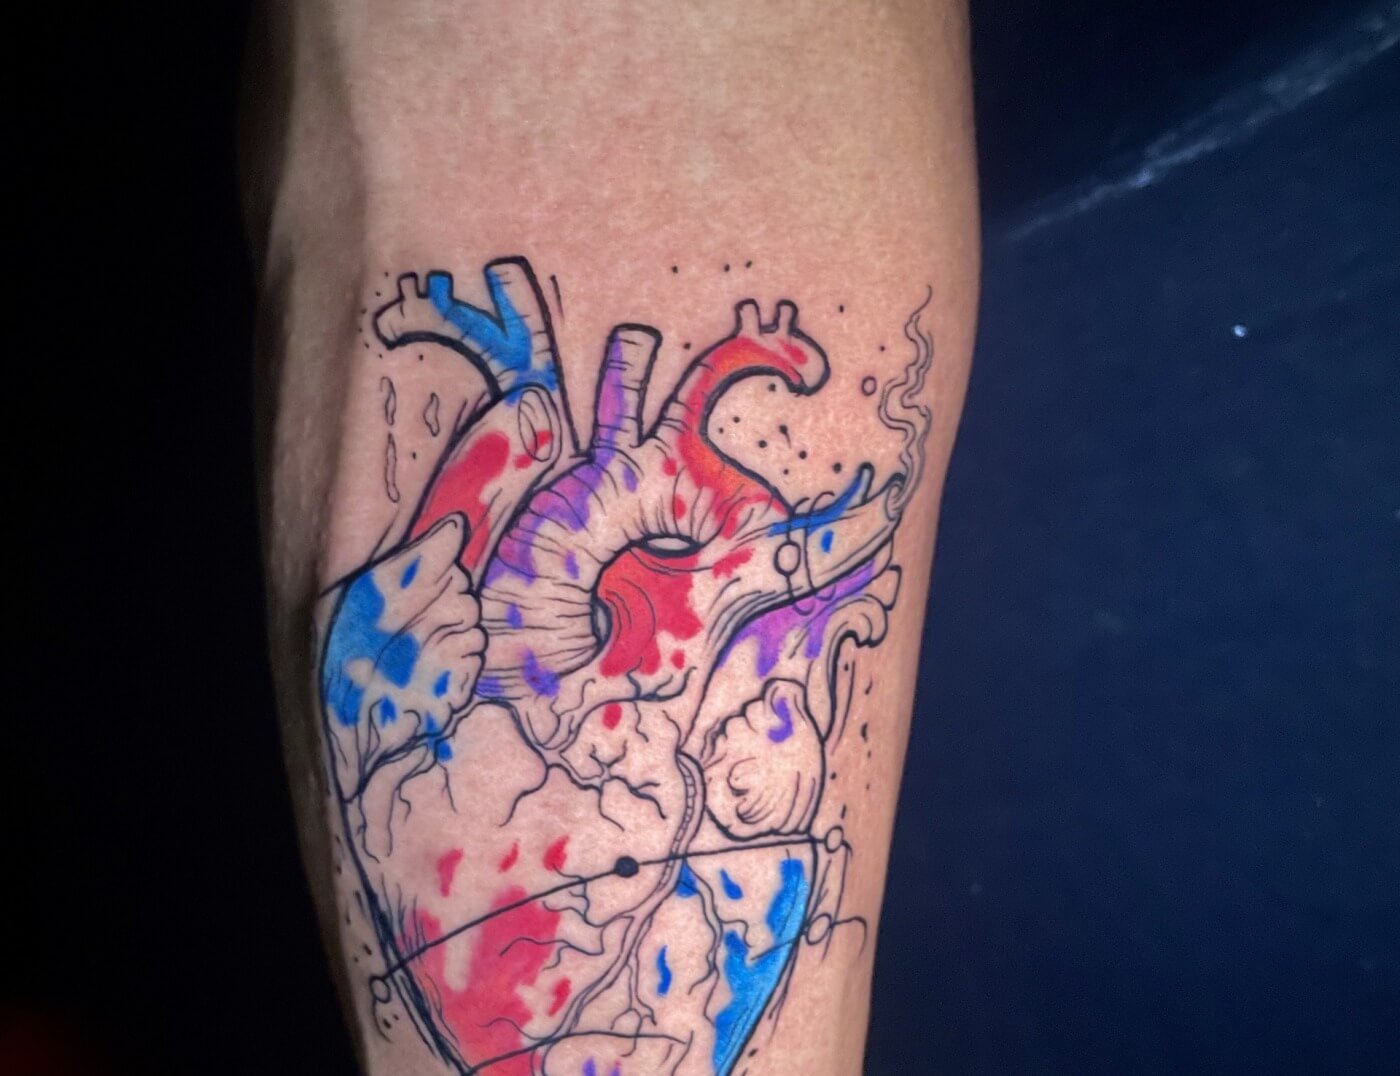 Fine line human heart tattoo with a touch of water colors by Lyric TheArtist at Iron Palm in downtown Atlanta. What do you think? Let us know in the comments. We're open late night until 2AM in ATL's Castleberry Hill district not far from the greyhound bus station and the infamous Magic City. Call 404-973-7828 or stop by for a free consultation. Walk-Ins are welcome. #hearttattoo #art #atlink #atlantatattoo #atlantaink #tattoolife #ironpalmtattoos #tattoostudio #atlantatatt #blackowned #colortattoo #atlantatattooshop #tattooideas #tattoo #finelinetattoo #georgiatattoo #inkedlife #atlantatattooartist #atlien #tattooartist #atlantaart #downtownatlanta #tattoodesign #atlantaartist #watercolortattoo #georgiatattooartist #coloraplashtattoo